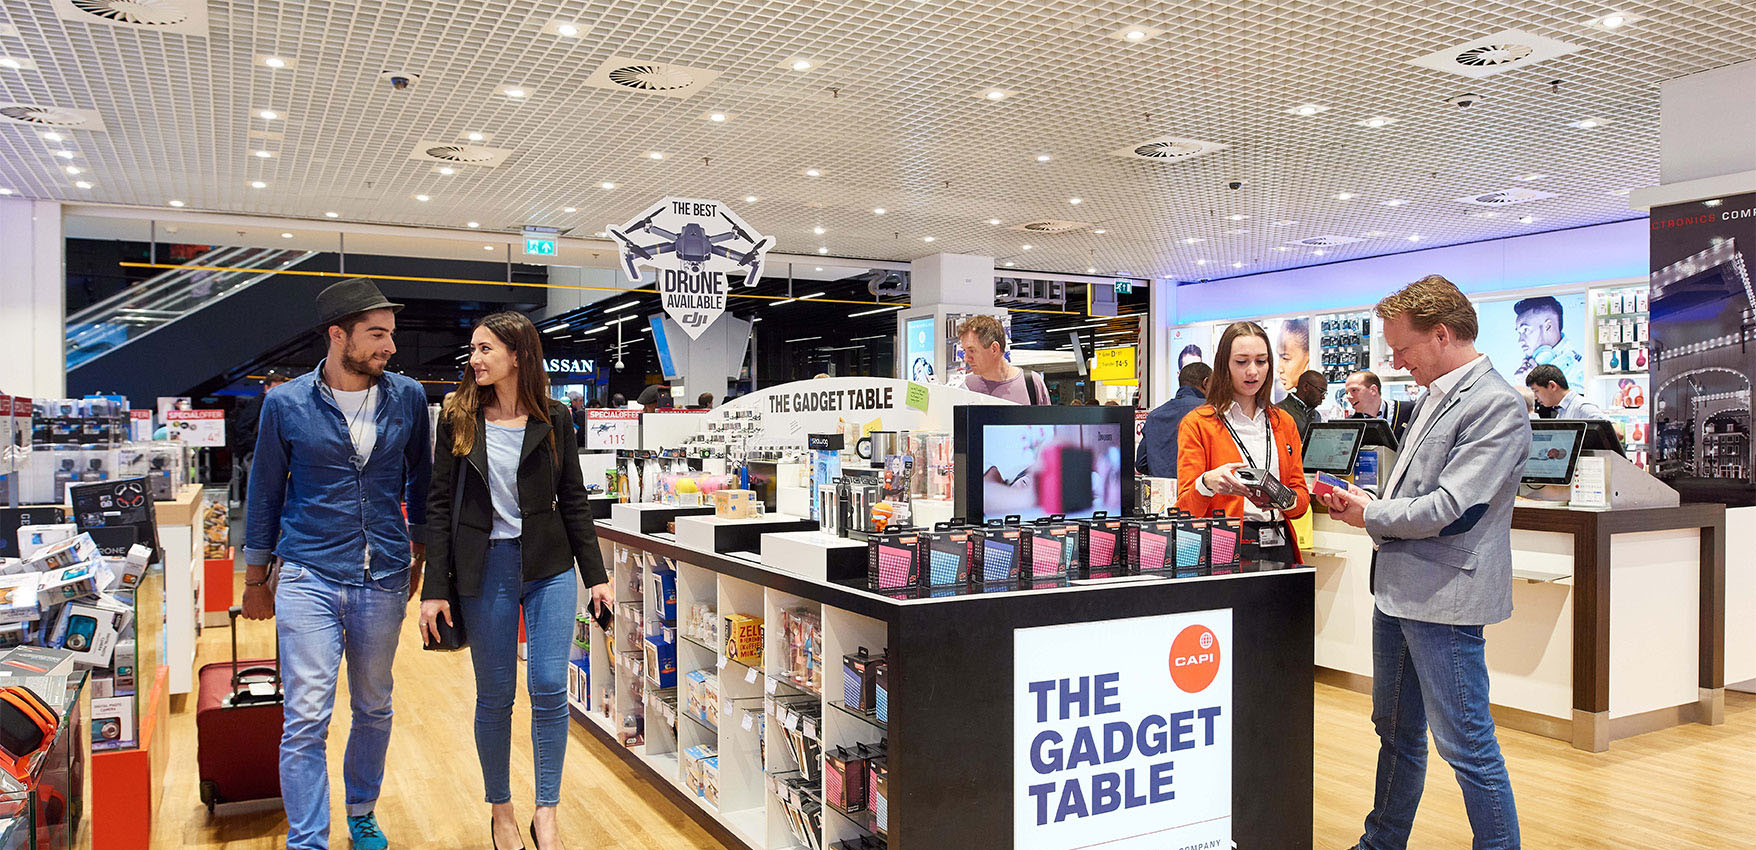 nachtmerrie wraak Passief Capi-Lux | Leading airport retailer in electronics